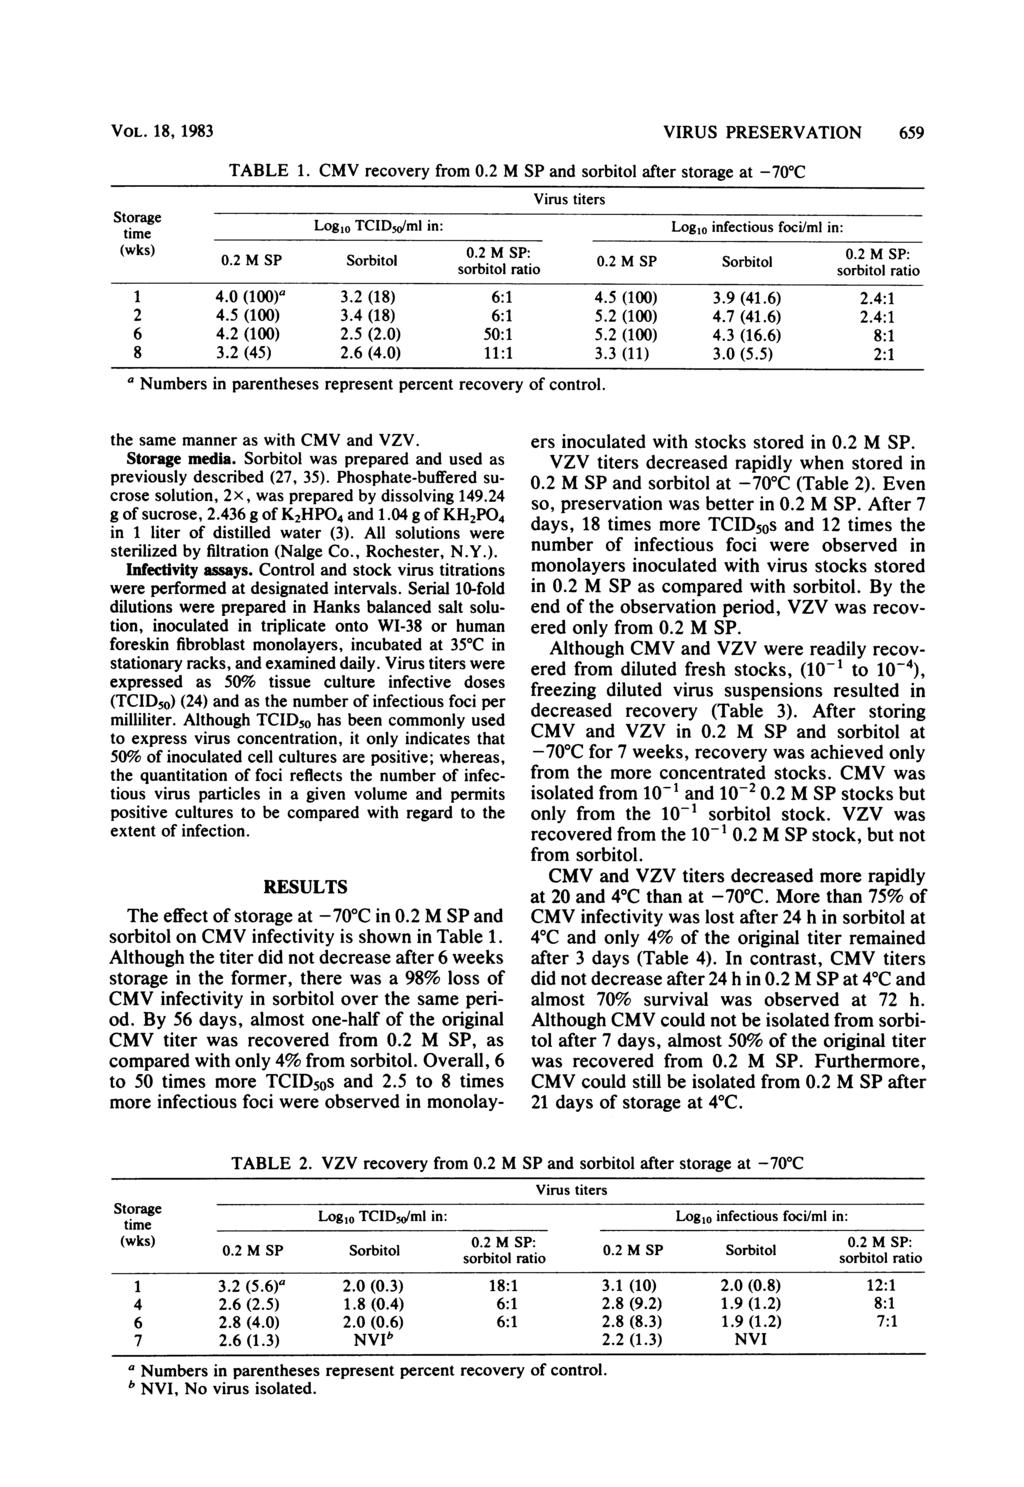 VOL. 18, 1983 TABLE 1. VIRUS PRESERVATION 659 CMV recovery from 0.2 M SP and sorbitol after storage at -70 C Virus titers Log10 infectious foci/ml in: Log10 TCID.5ml in: (wks) 0.2 M SP Sorbitol 0.